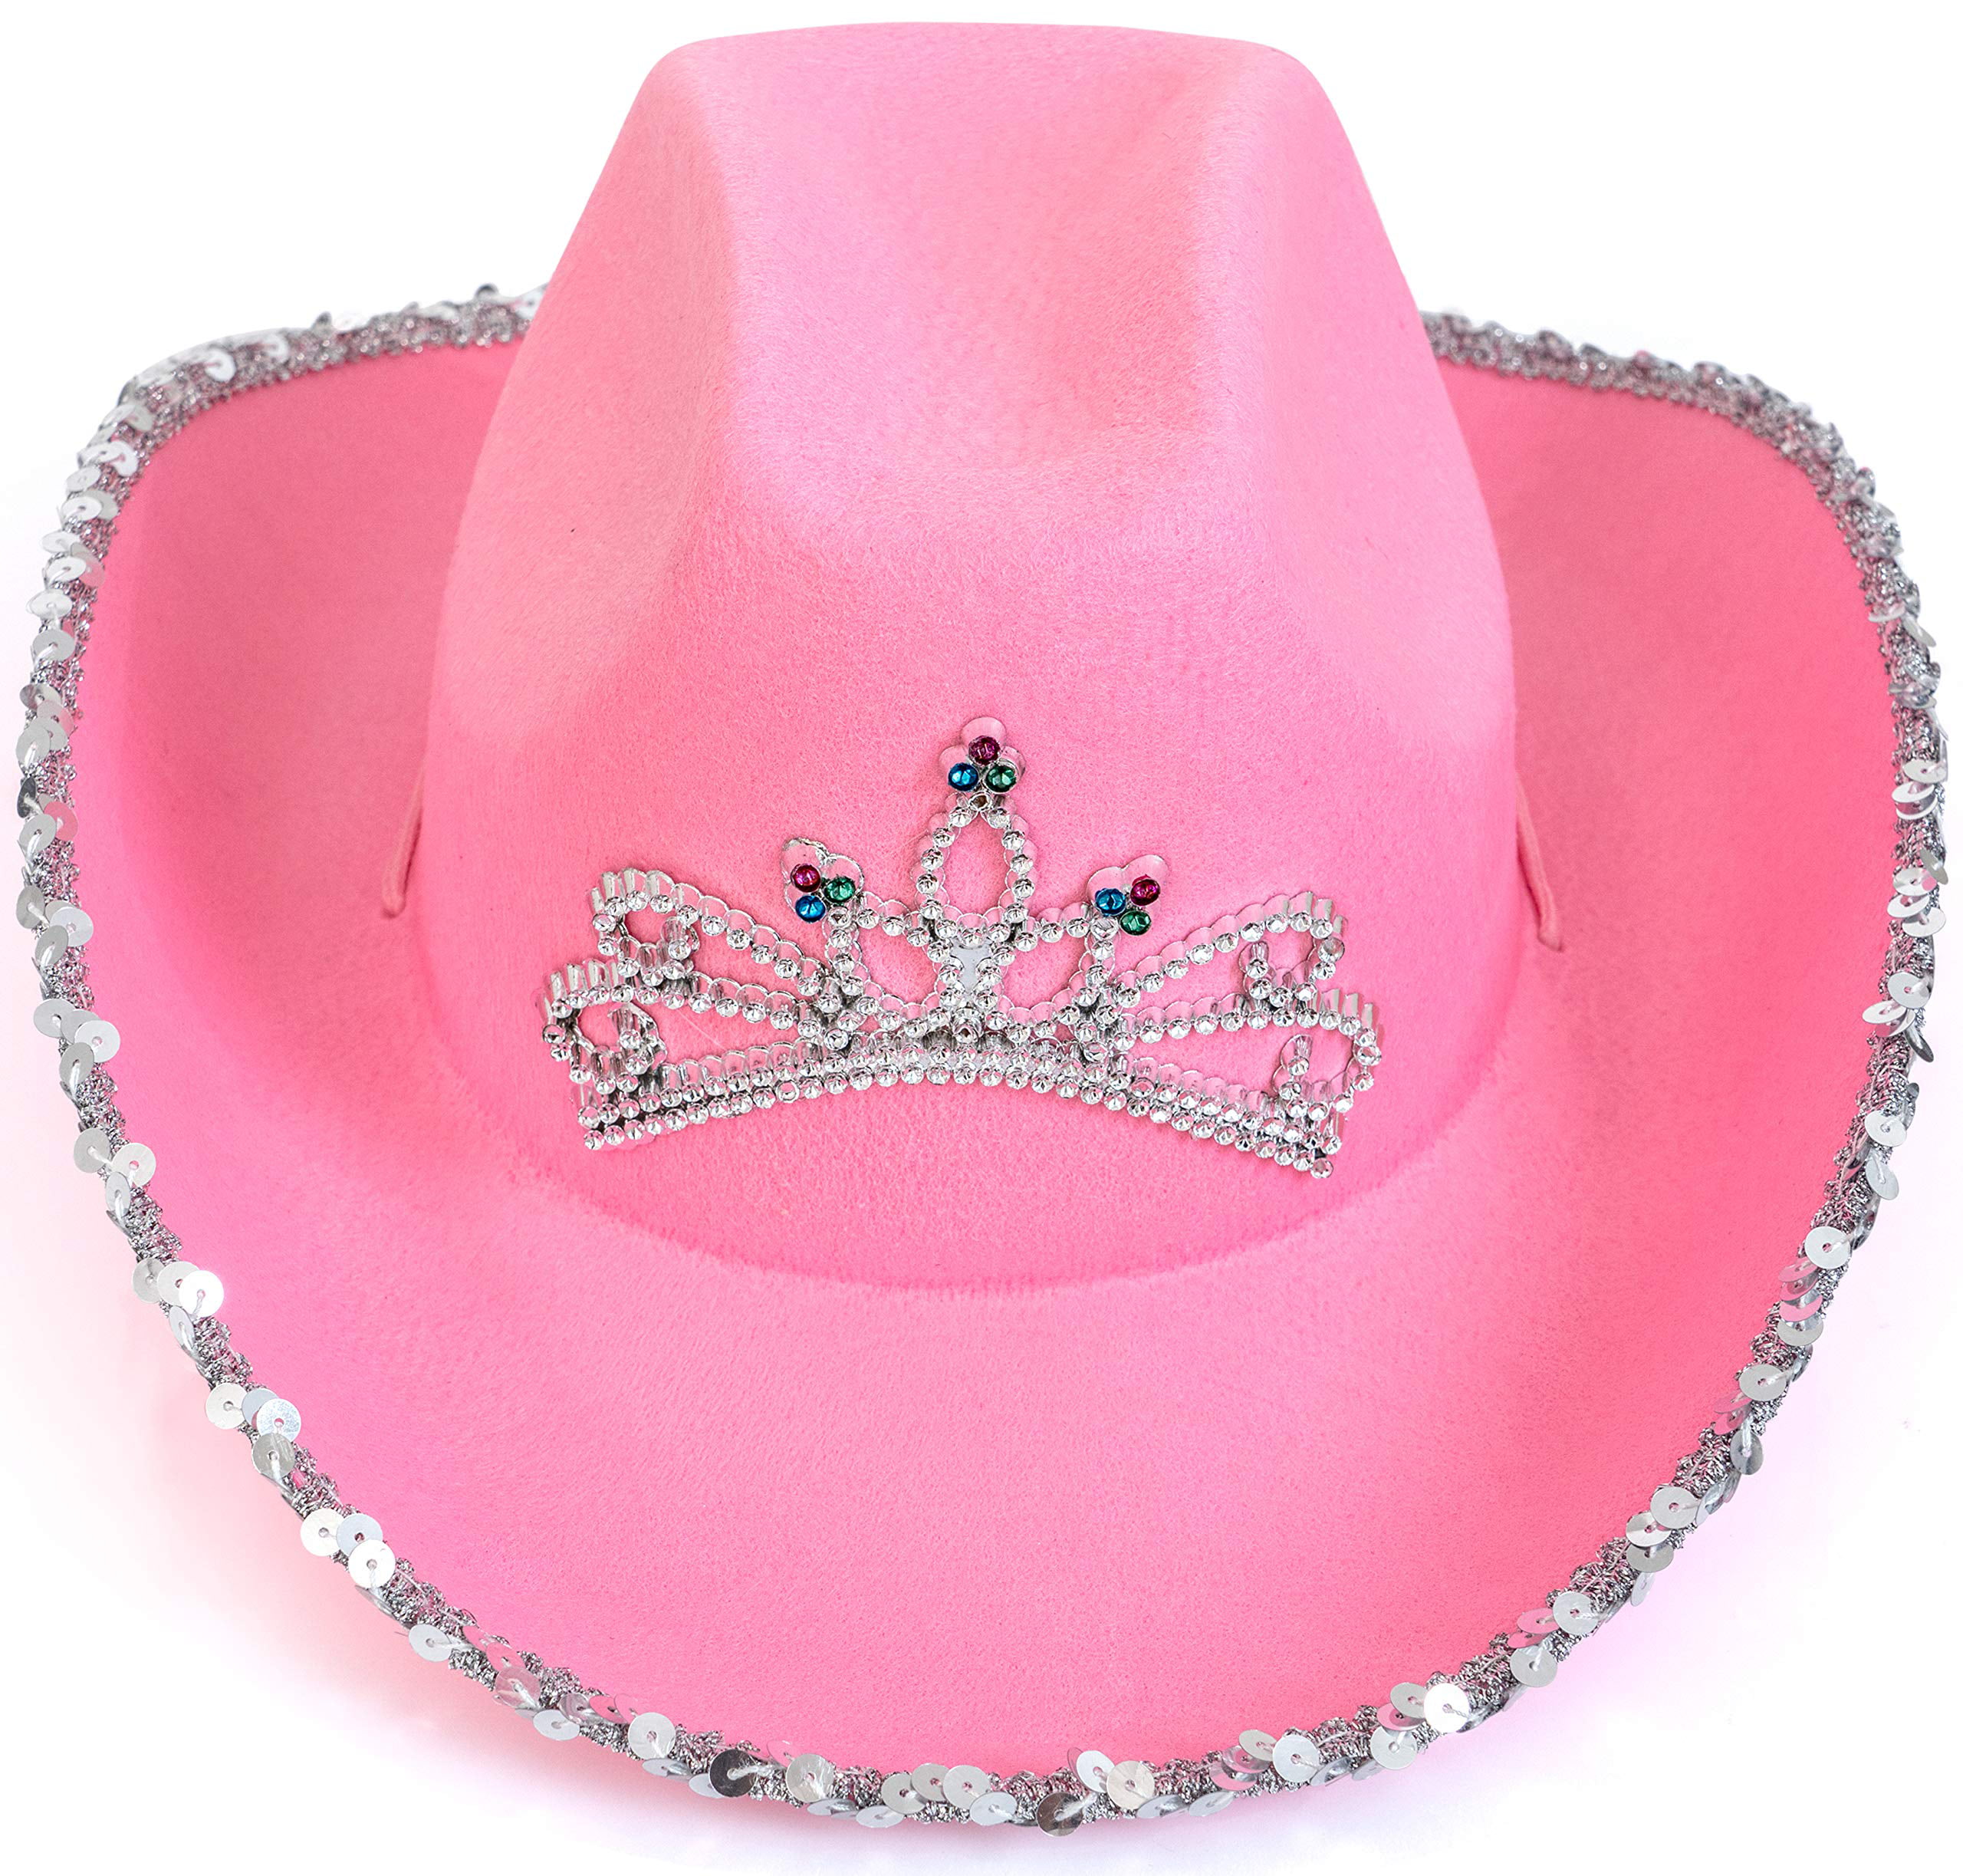 Details about   Childrens Girls Pink Cowgirl Hat Embellished Bling Rhinestone One Size Fits Most 